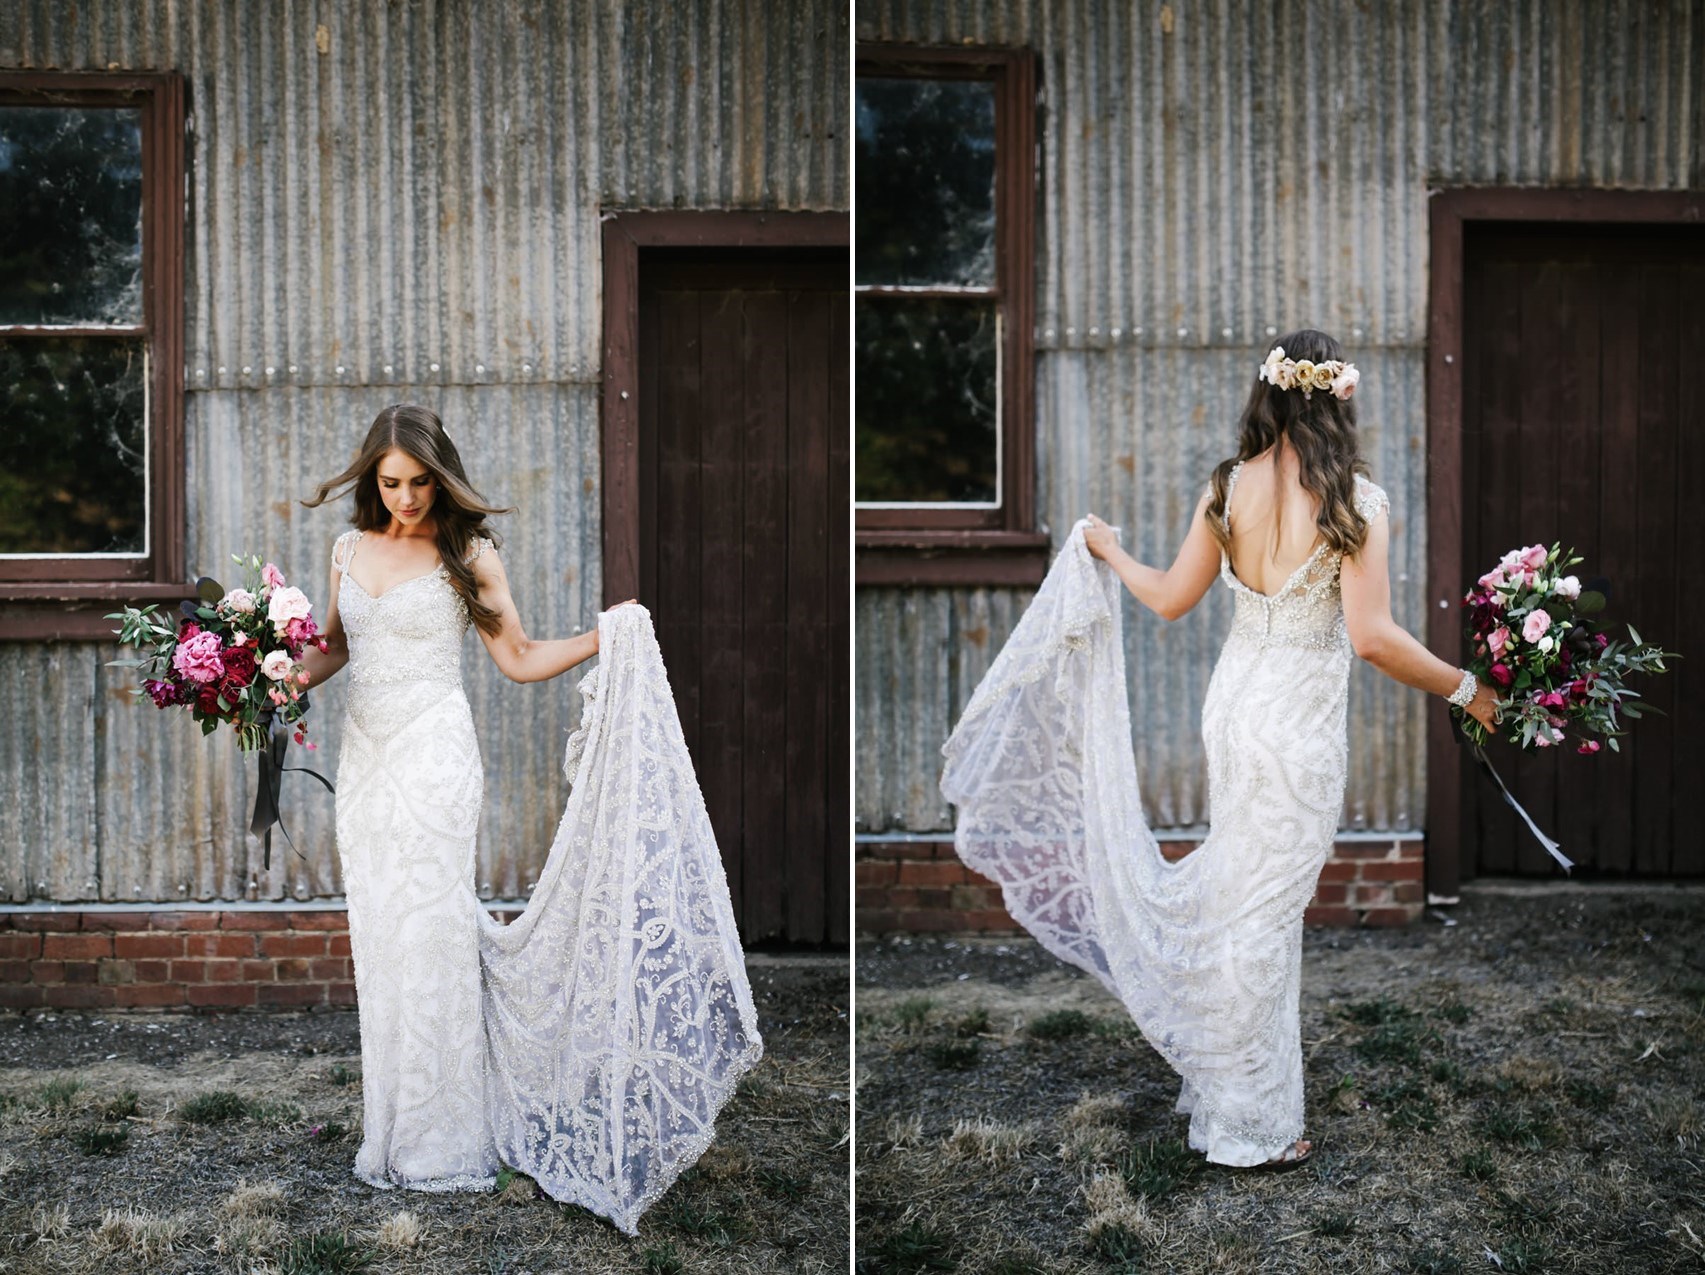 Beautiful Anna Campbell wedding dress // Photography by Brown Paper Parcel